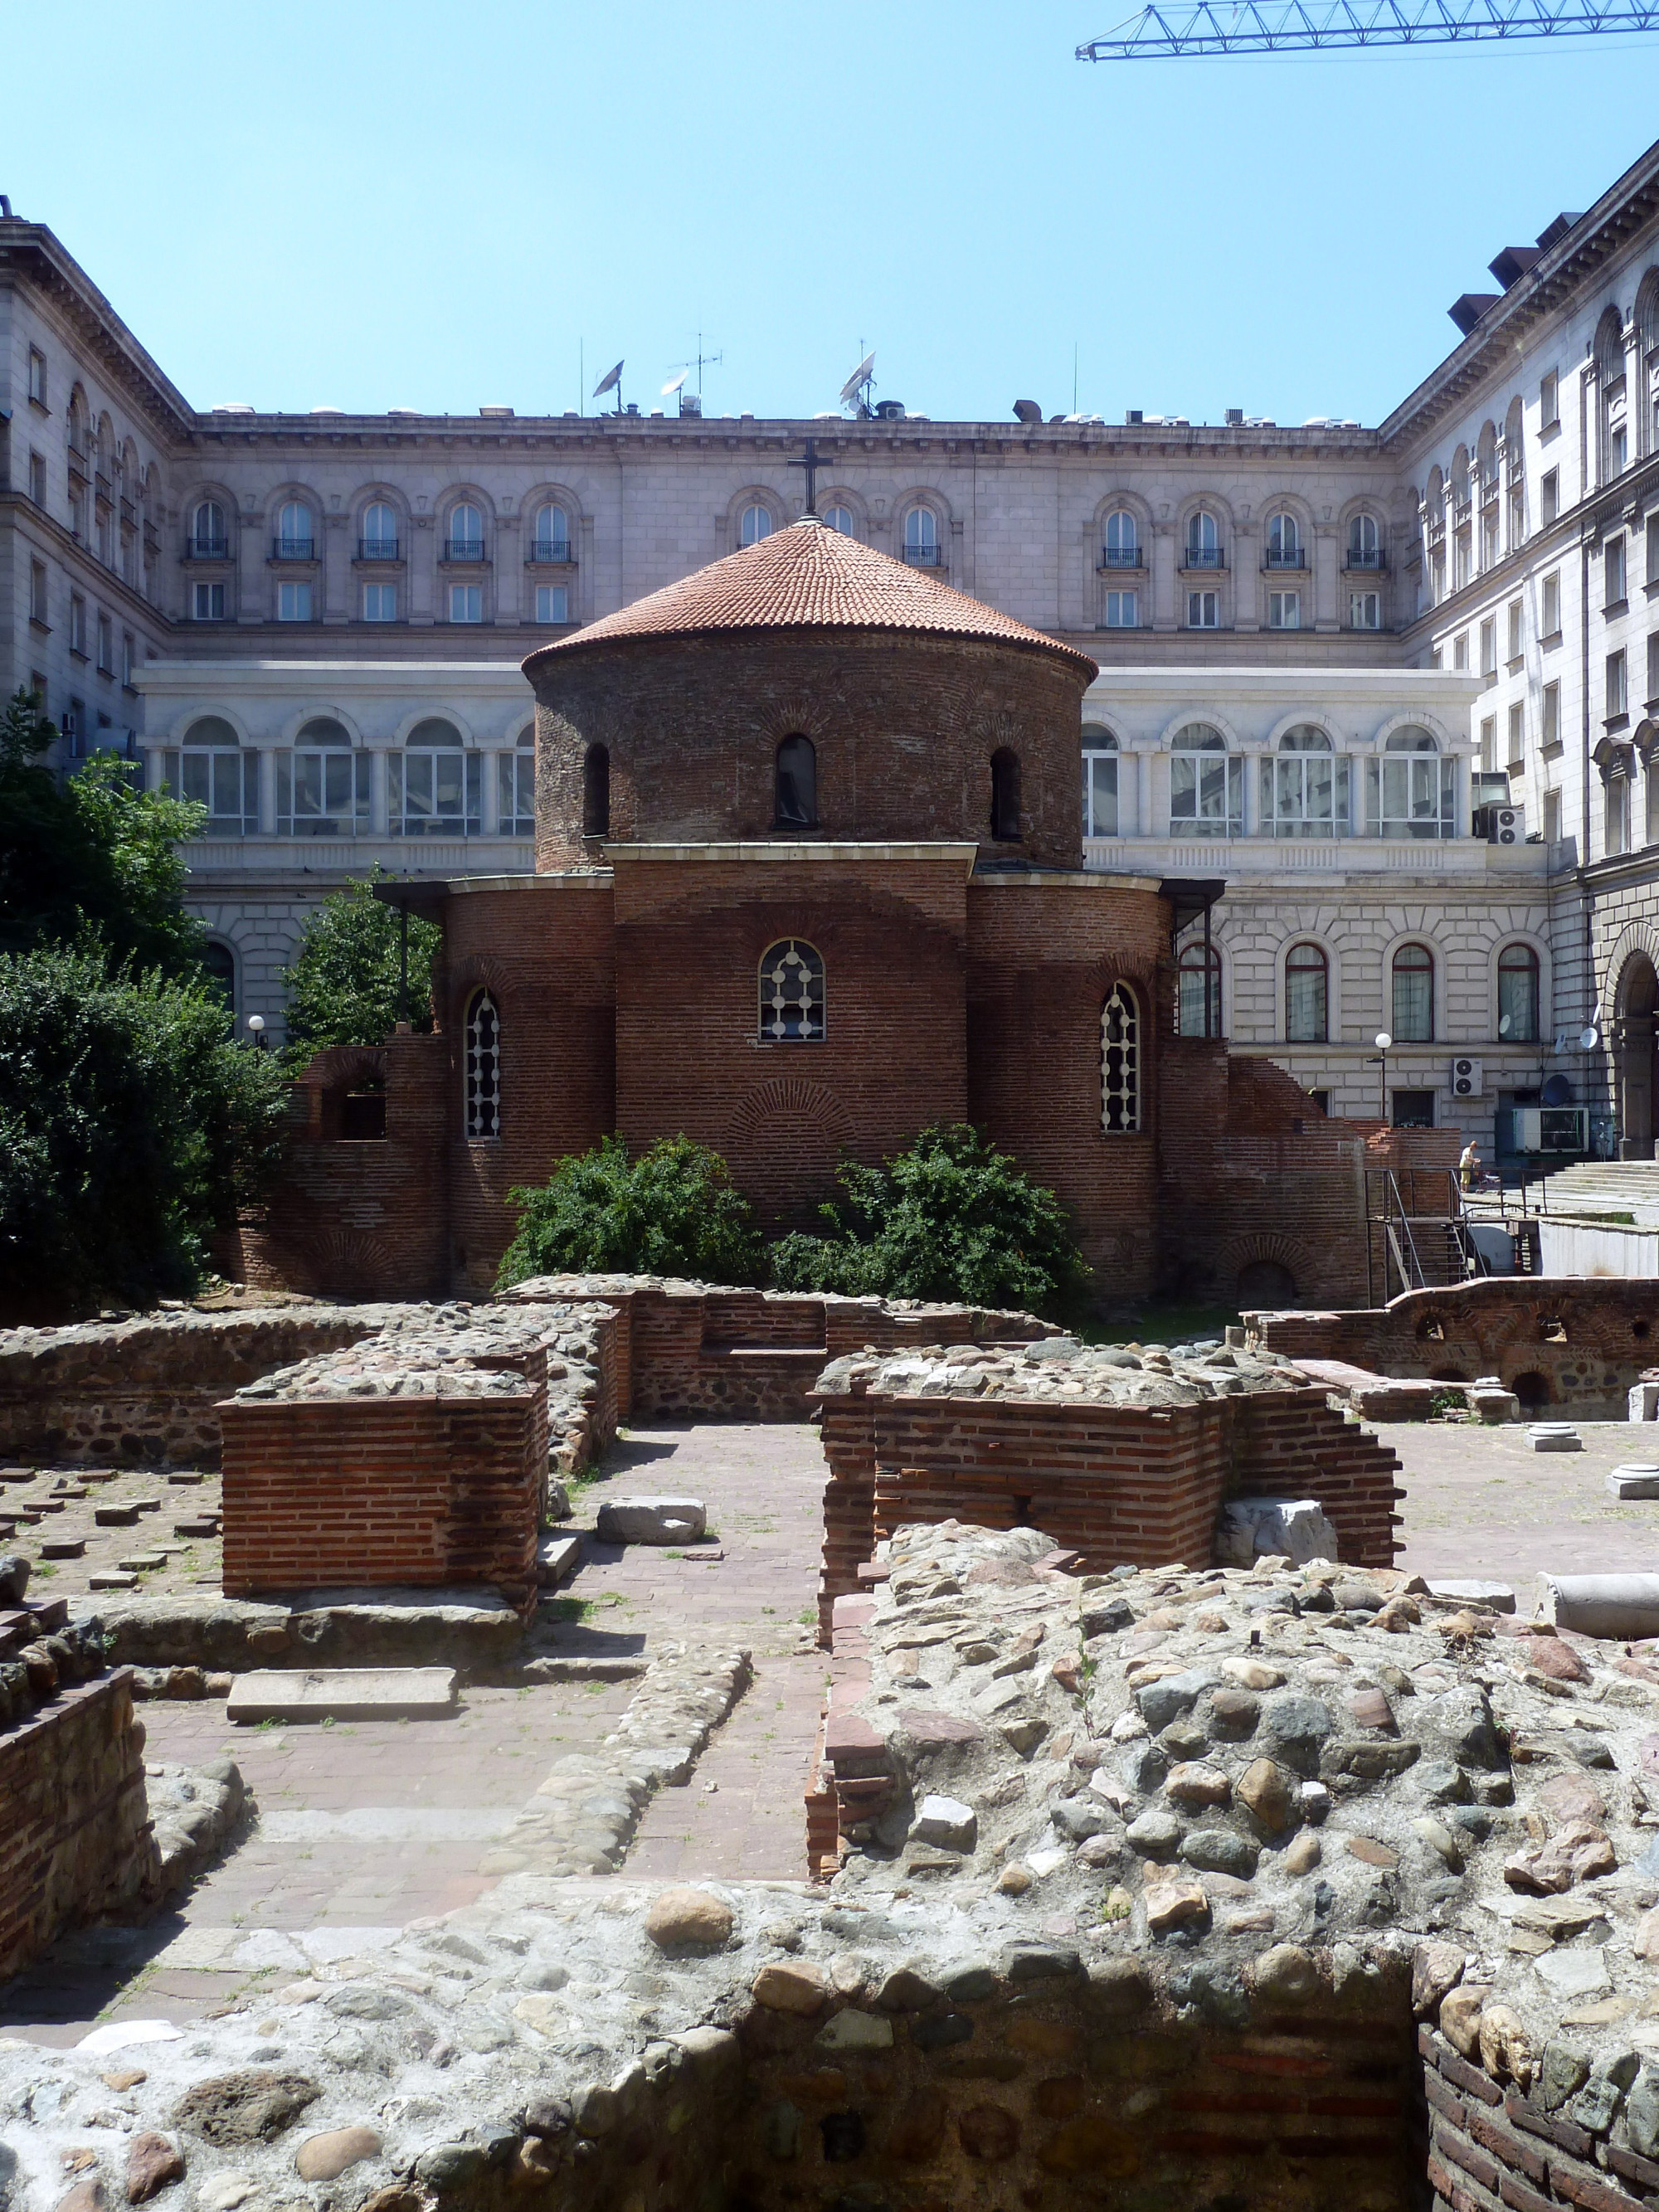 Sofia's oldest building, this 4th-century Christian church is cylindrical, with a frescoed dome.